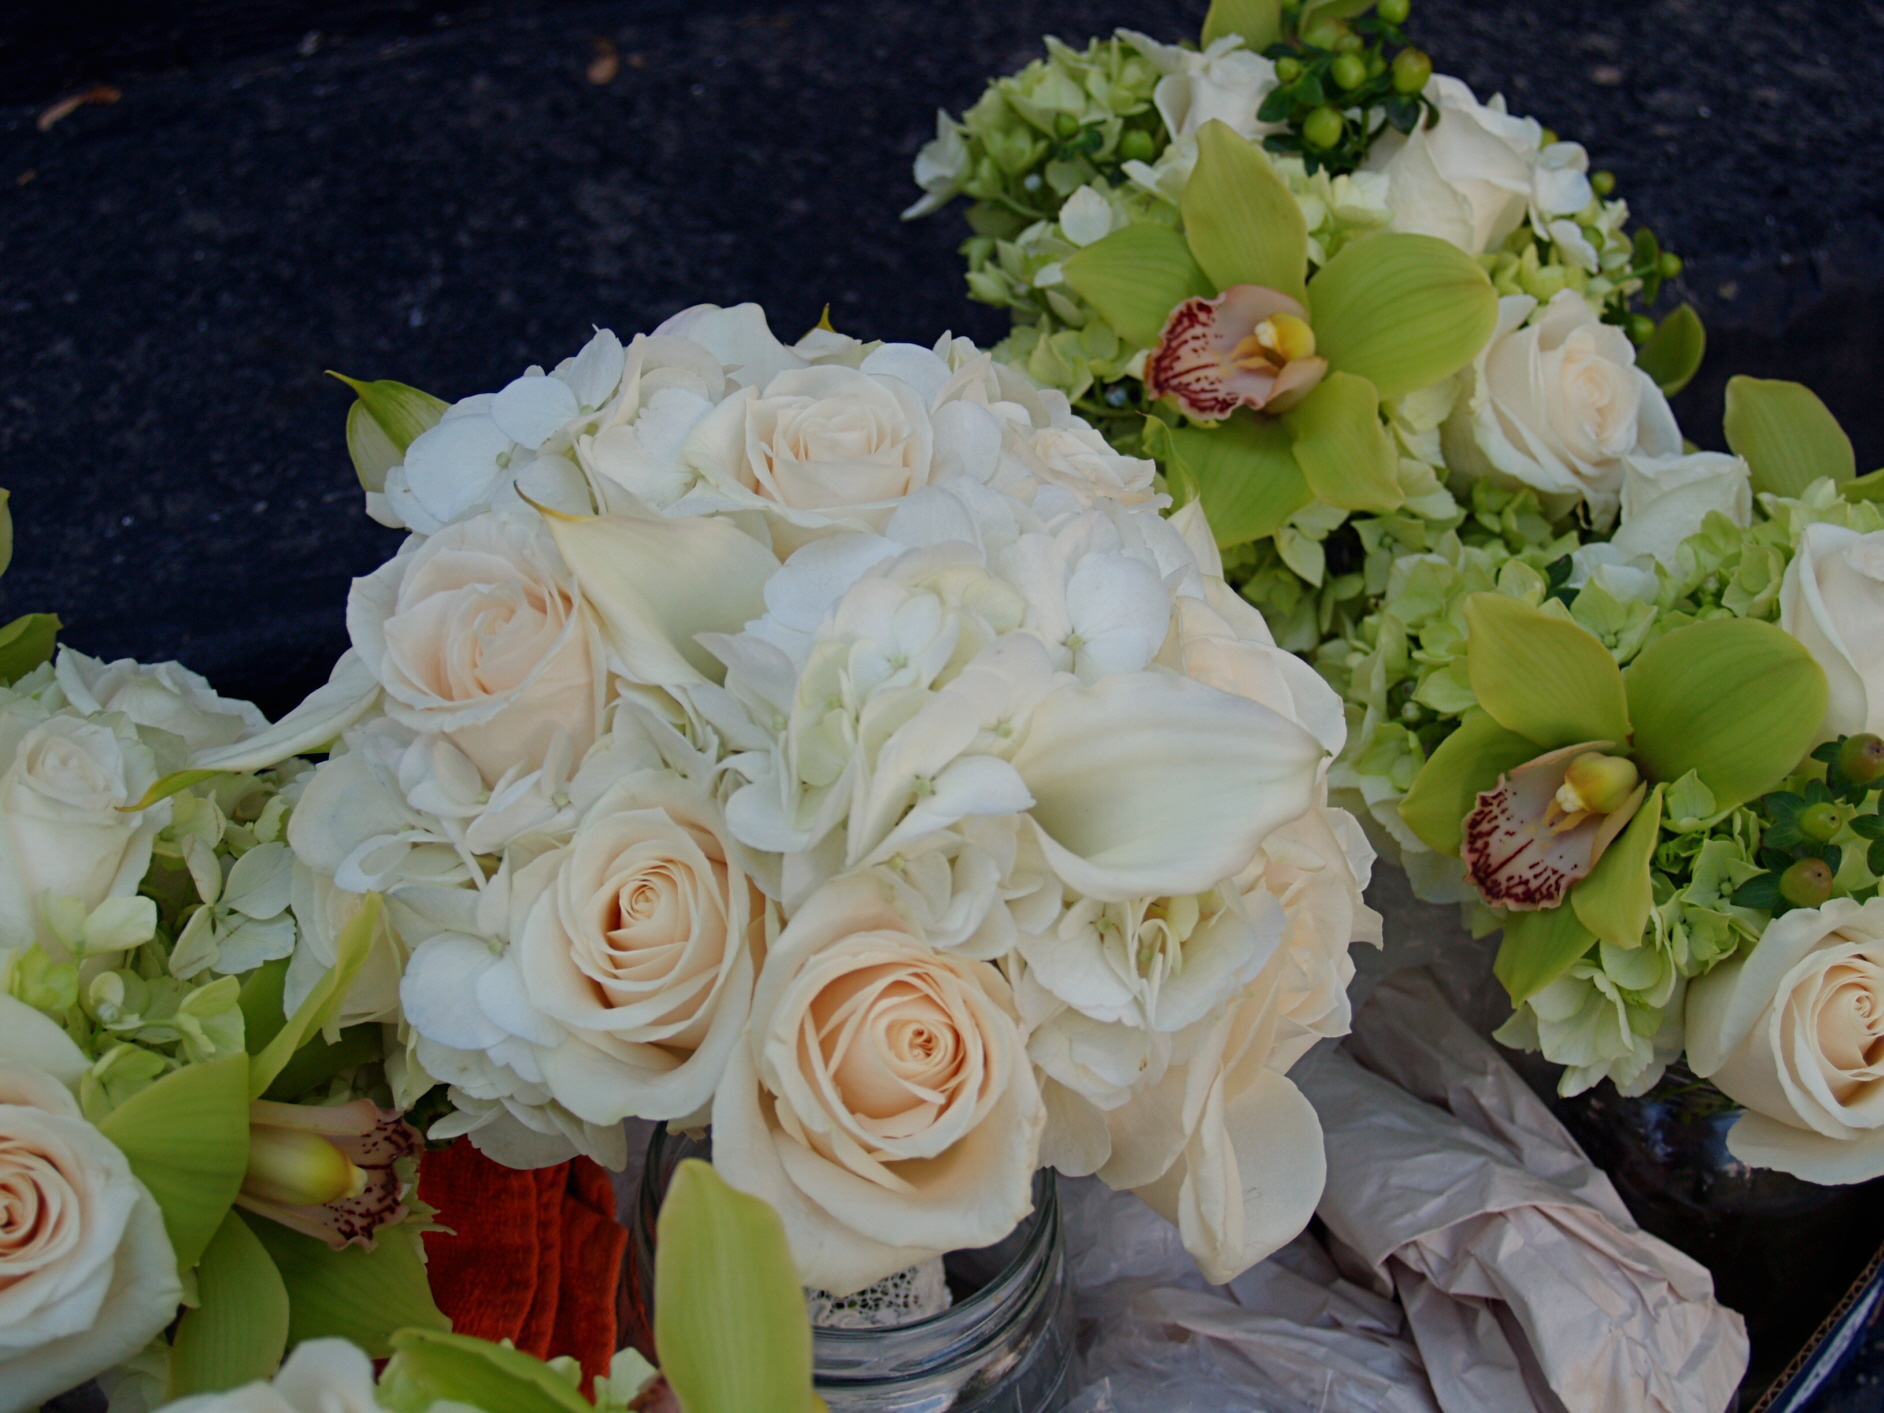 Wedding flowers with roses and hydrangeas